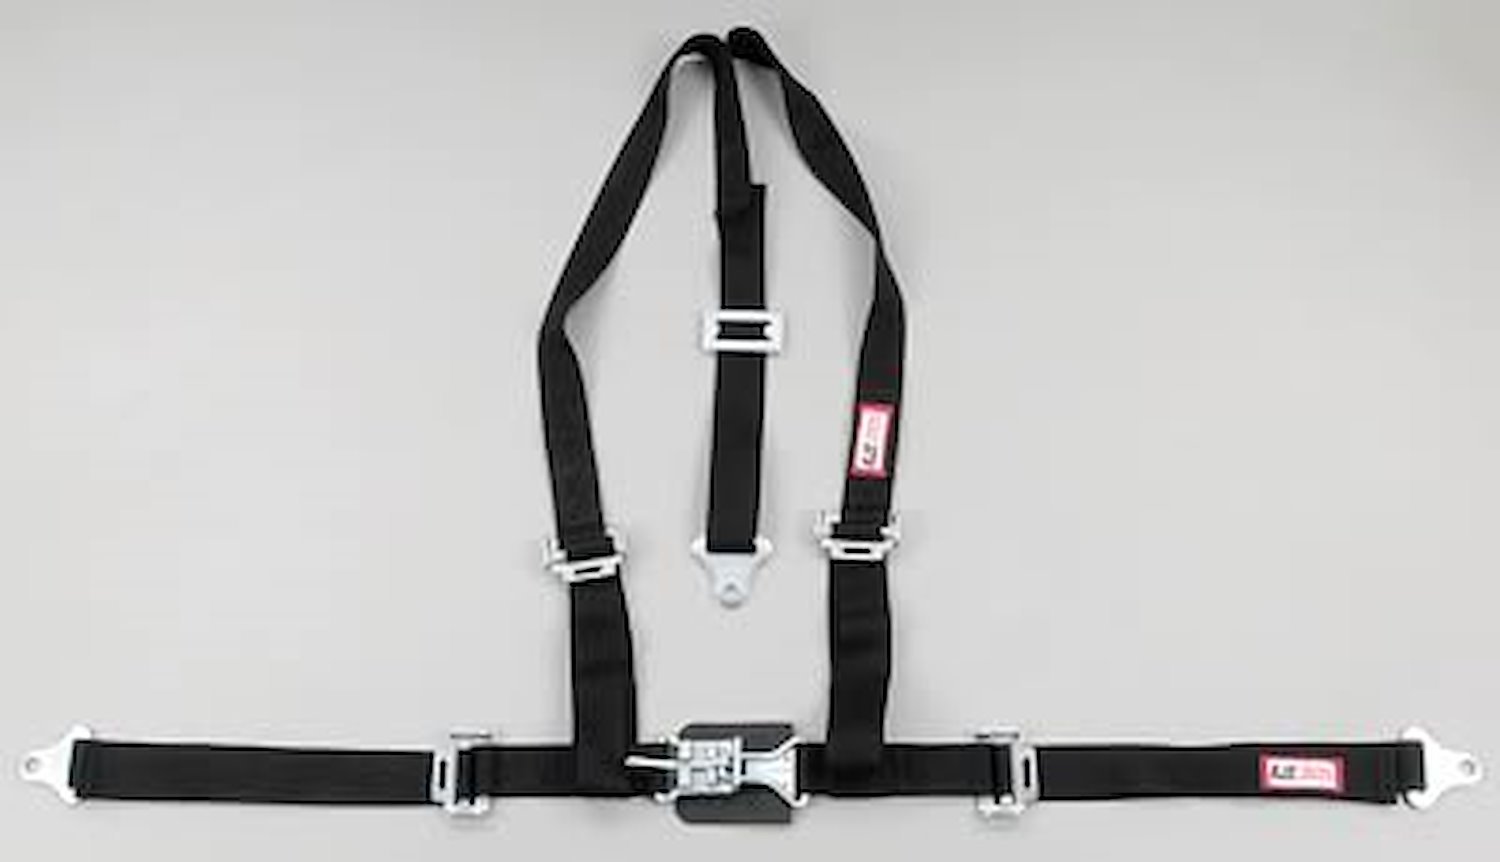 NON-SFI L&L HARNESS 2 PULL DOWN Lap Belt w/Adjuster 2 S.H. Individual FLOOR MOUNT w/STERNUM STRAP ALL WRAP ENDS BLACK